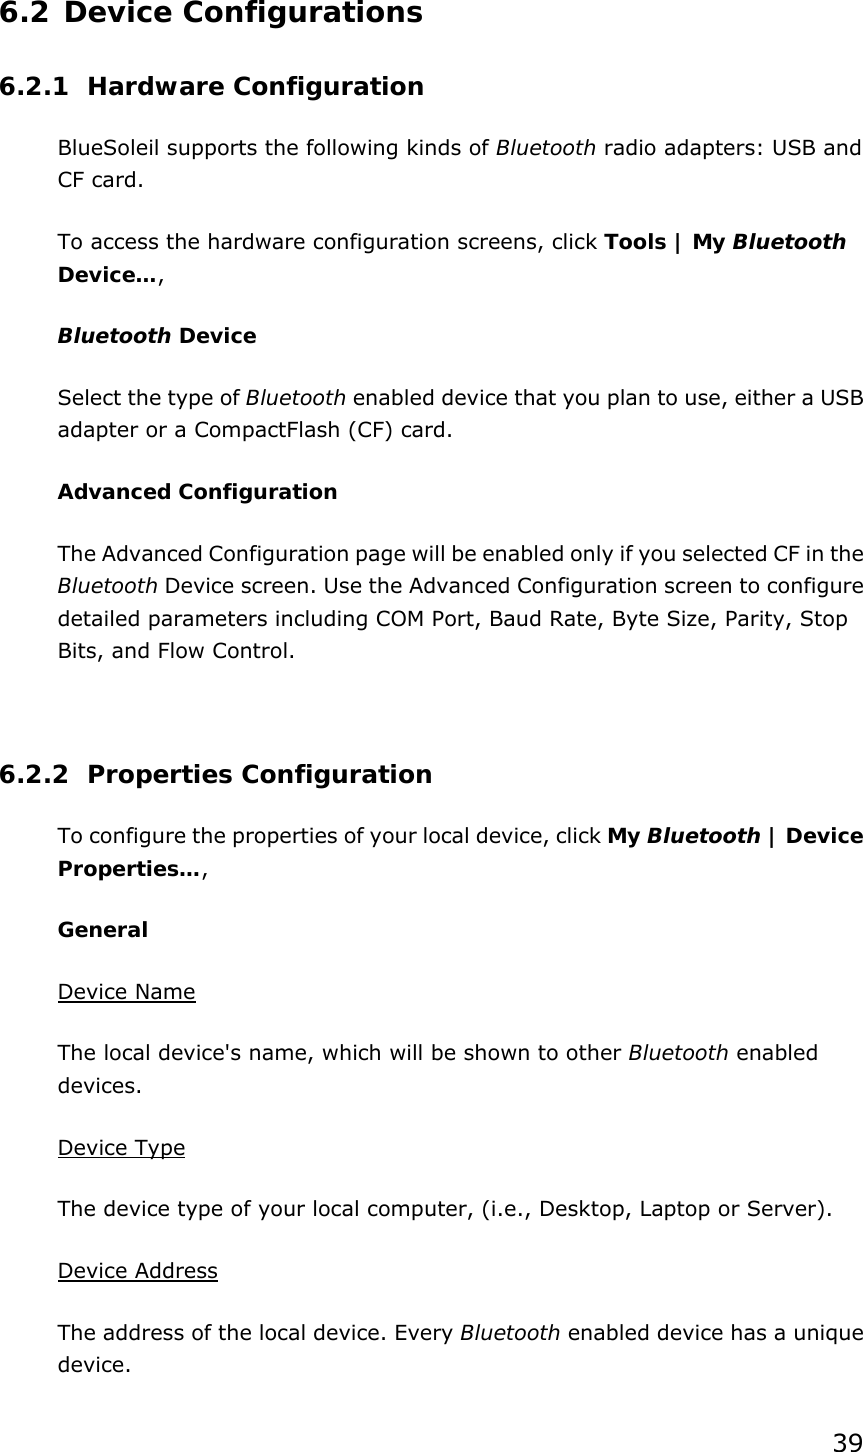 39 6.2 Device Configurations 6.2.1 Hardware Configuration  BlueSoleil supports the following kinds of Bluetooth radio adapters: USB and CF card. To access the hardware configuration screens, click Tools | My Bluetooth Device…,  Bluetooth Device Select the type of Bluetooth enabled device that you plan to use, either a USB adapter or a CompactFlash (CF) card. Advanced Configuration The Advanced Configuration page will be enabled only if you selected CF in the Bluetooth Device screen. Use the Advanced Configuration screen to configure detailed parameters including COM Port, Baud Rate, Byte Size, Parity, Stop Bits, and Flow Control.    6.2.2 Properties Configuration To configure the properties of your local device, click My Bluetooth | Device Properties…,  General Device Name The local device&apos;s name, which will be shown to other Bluetooth enabled devices. Device Type The device type of your local computer, (i.e., Desktop, Laptop or Server). Device Address The address of the local device. Every Bluetooth enabled device has a unique device. 